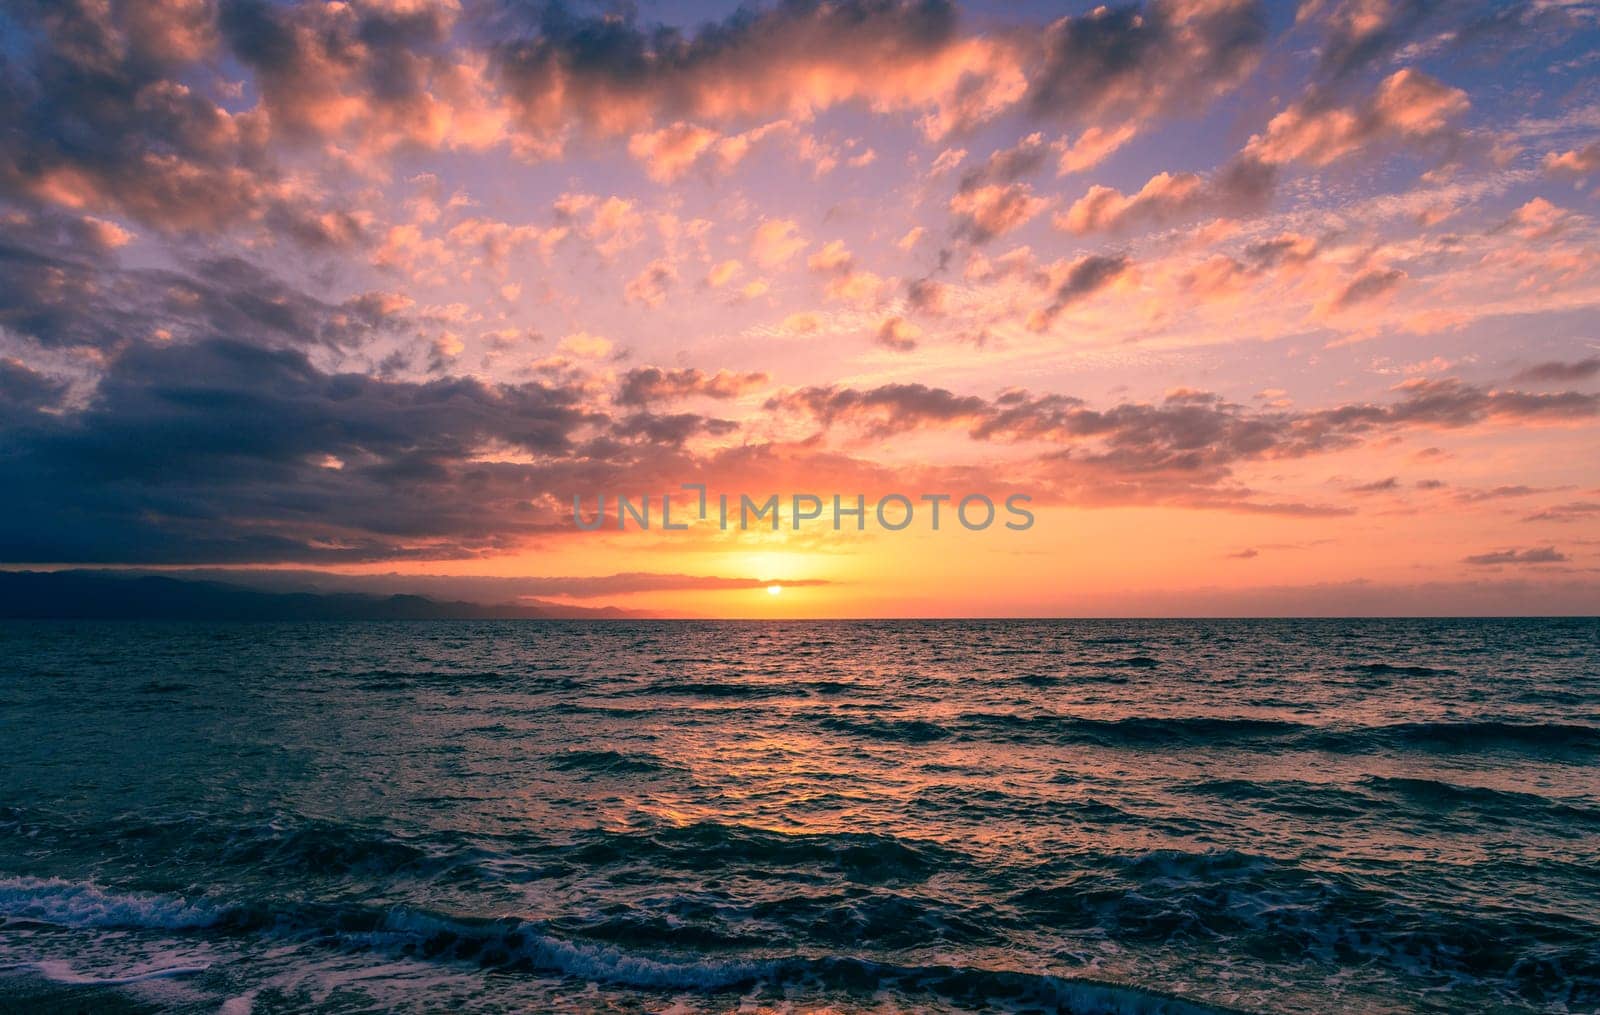 Fantastic sunset above the Mediterranean sea, Cyprus. 1 by Mixa74